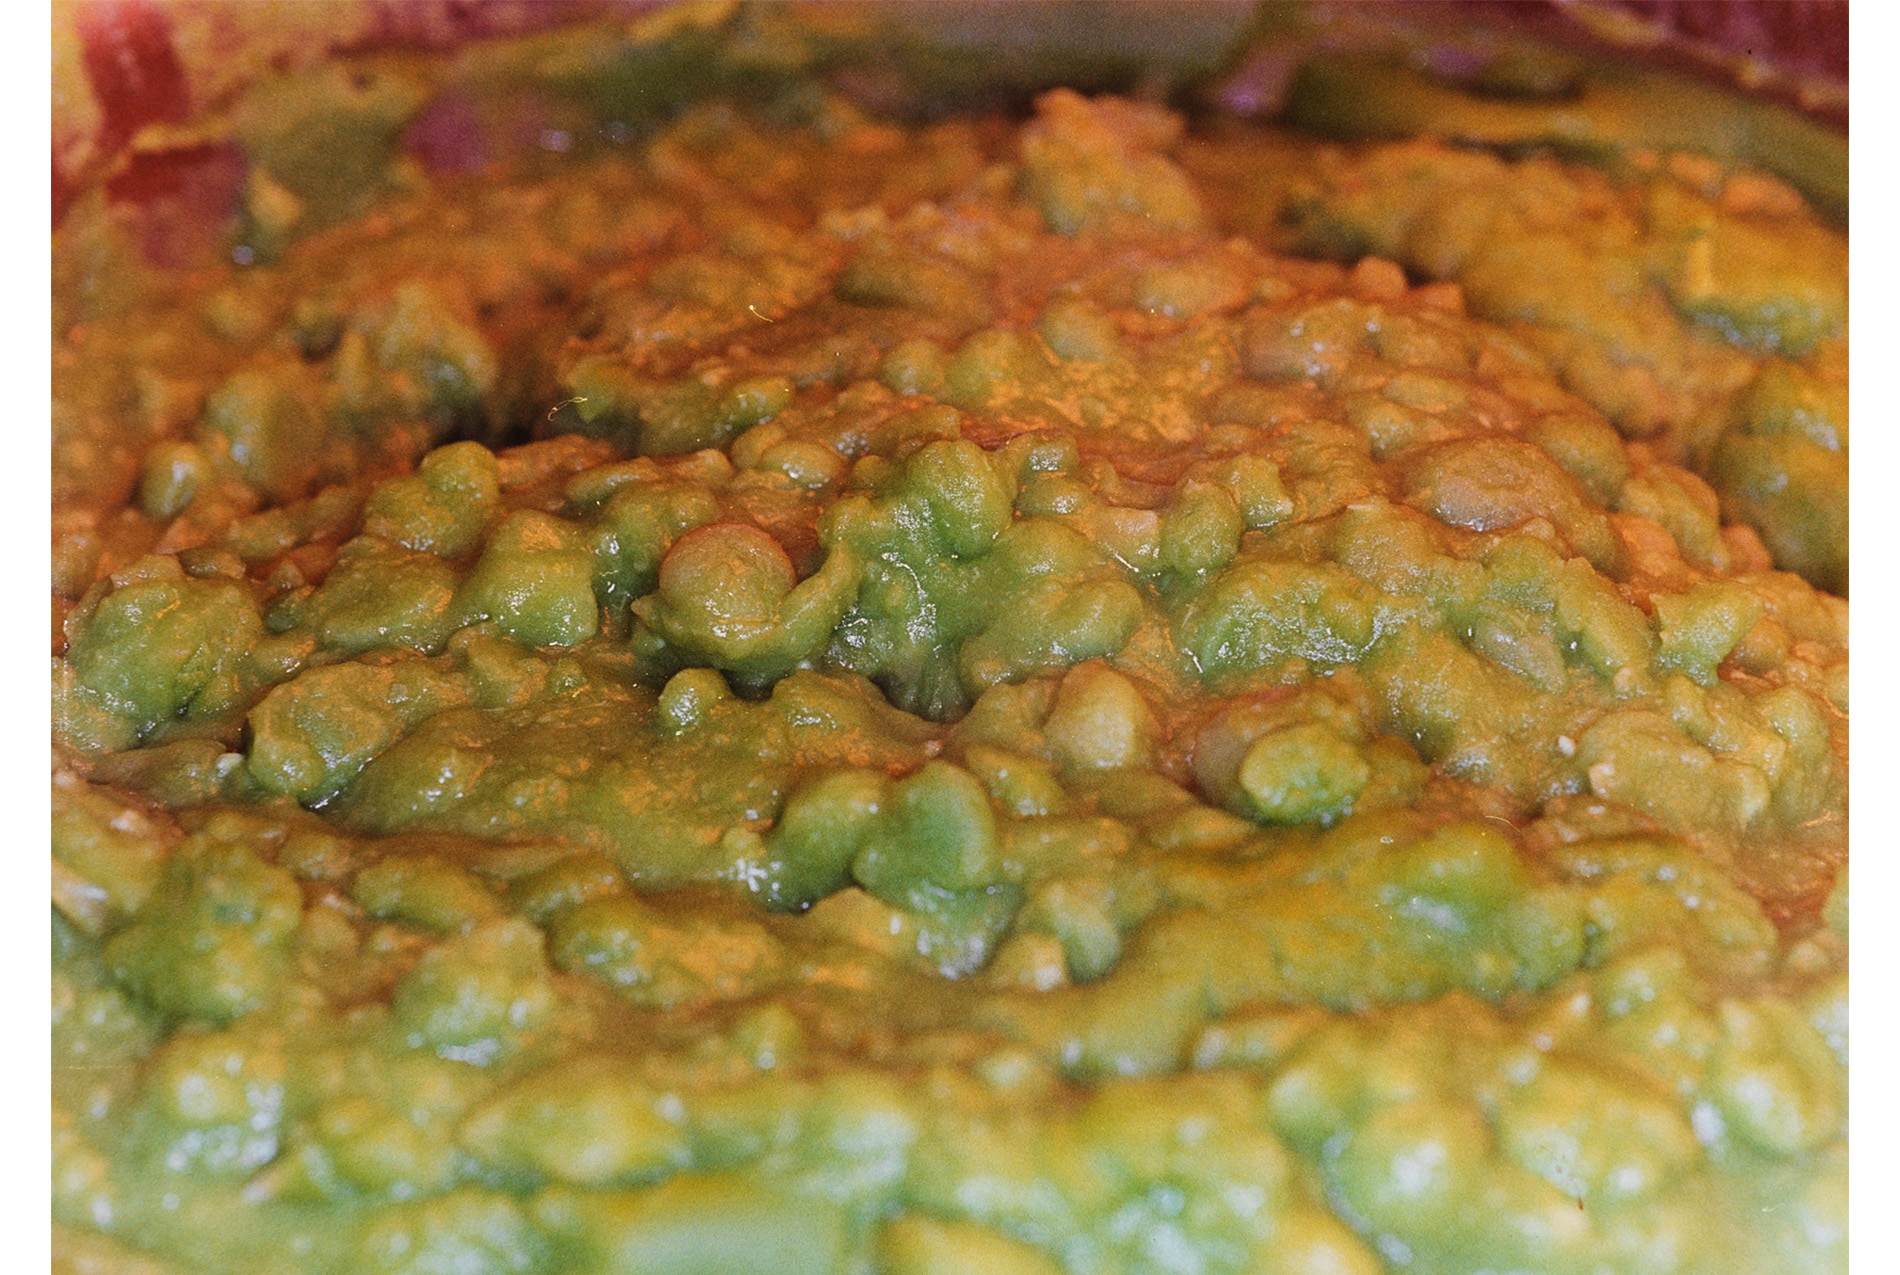 close-up of a mound of smashed green peas